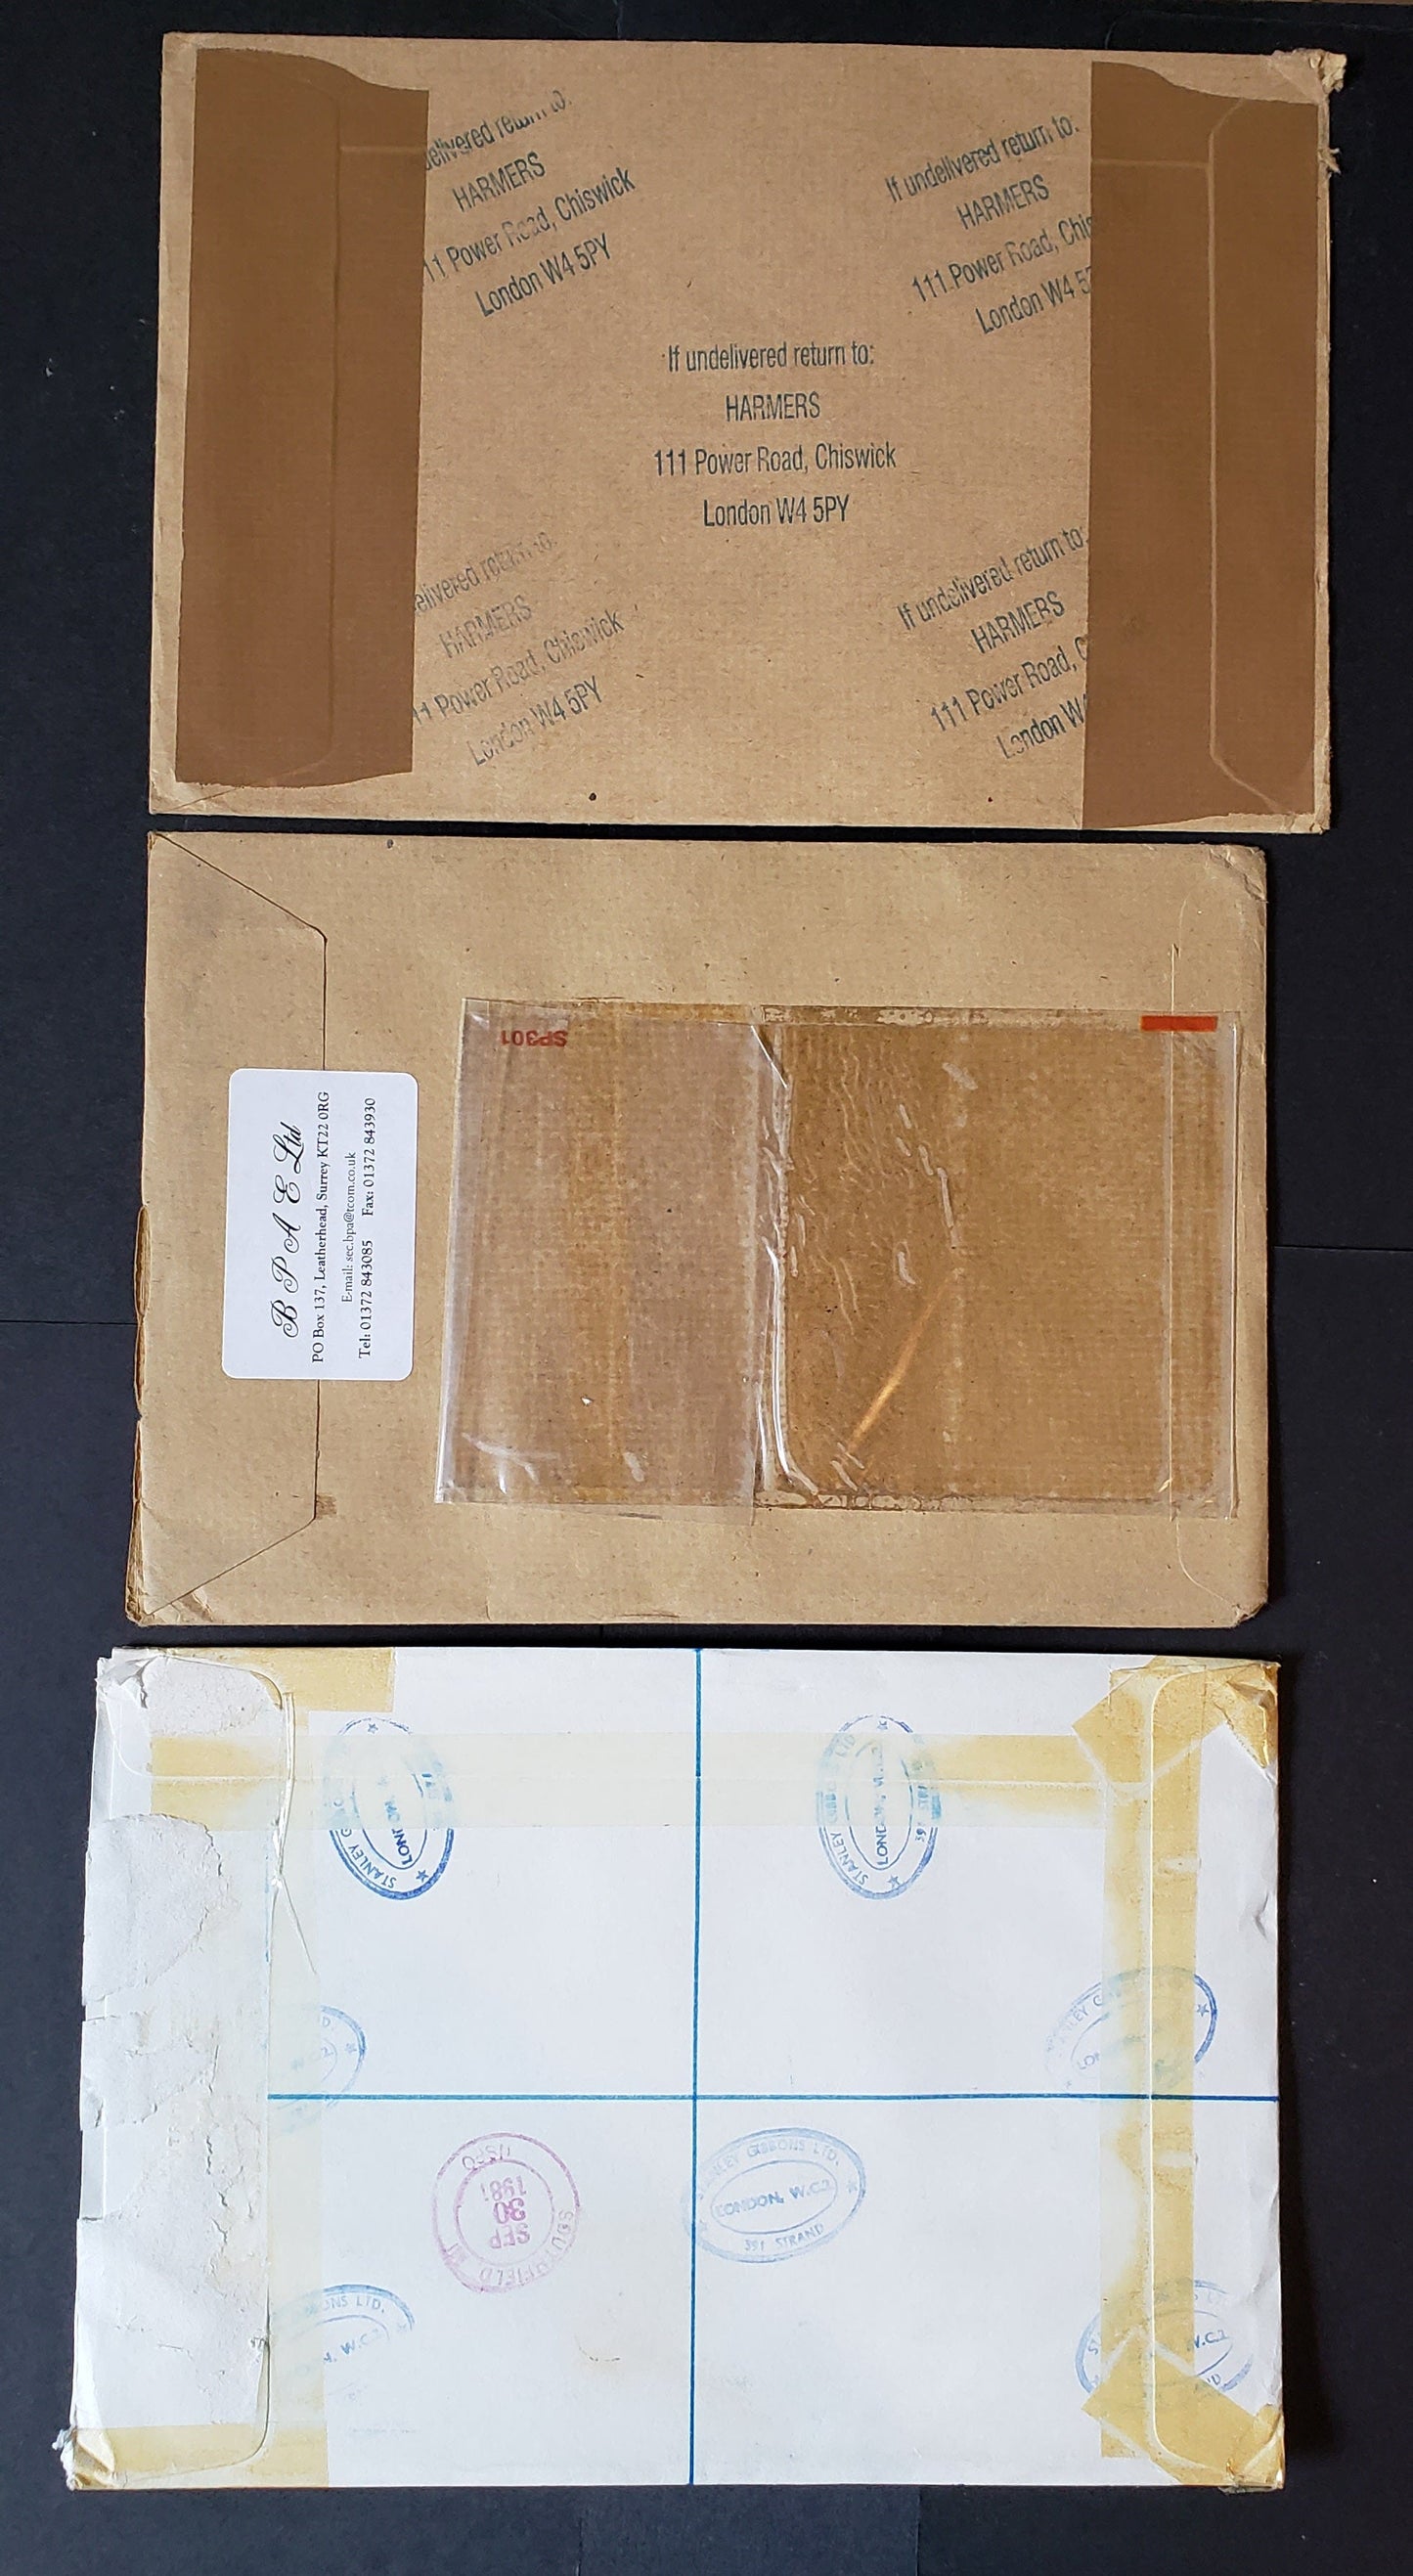 Lot 69 Great Britain 1988-1997 Castle Definitives, 7 VF Catalogue Sized Covers, To The USA, All Franked With Better Commemoratives, High Value Machins Or Both, Click on Listing to See ALL Pictures, Estimated Value $50 USD